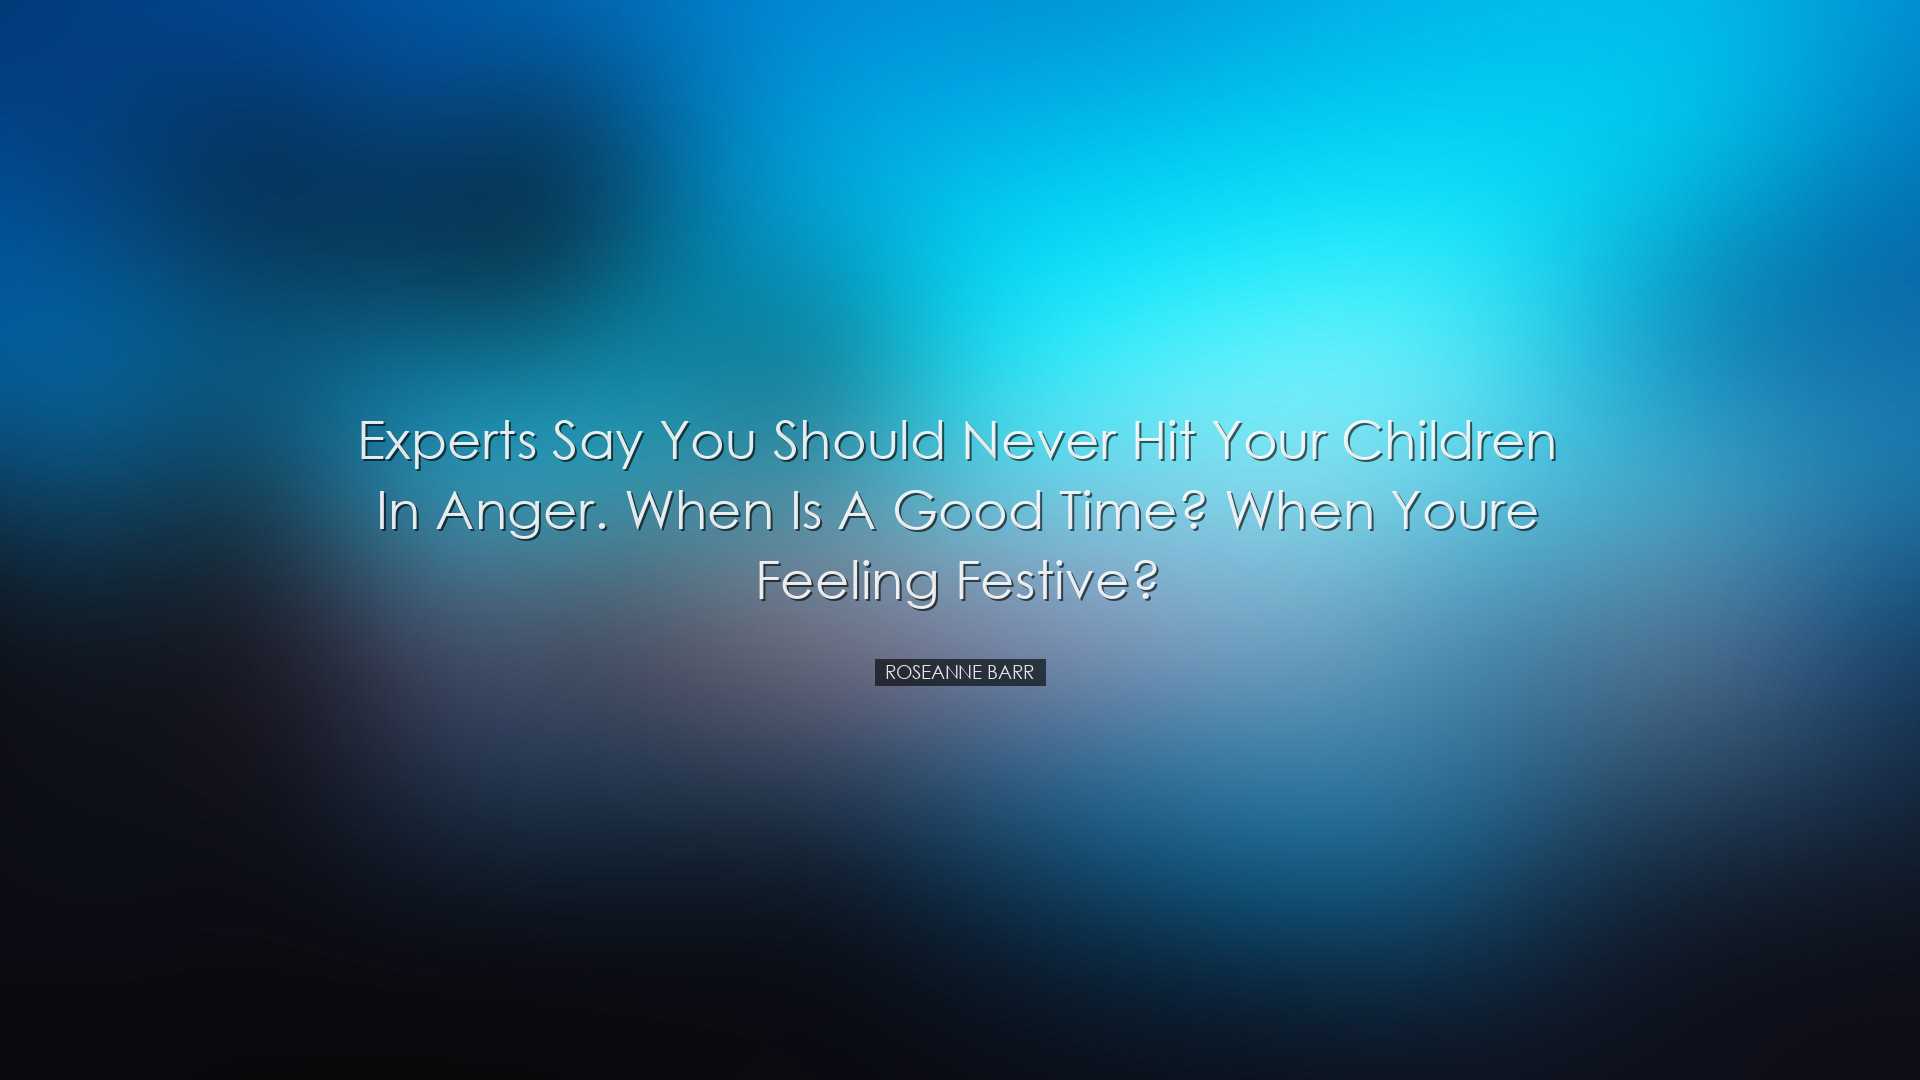 Experts say you should never hit your children in anger. When is a